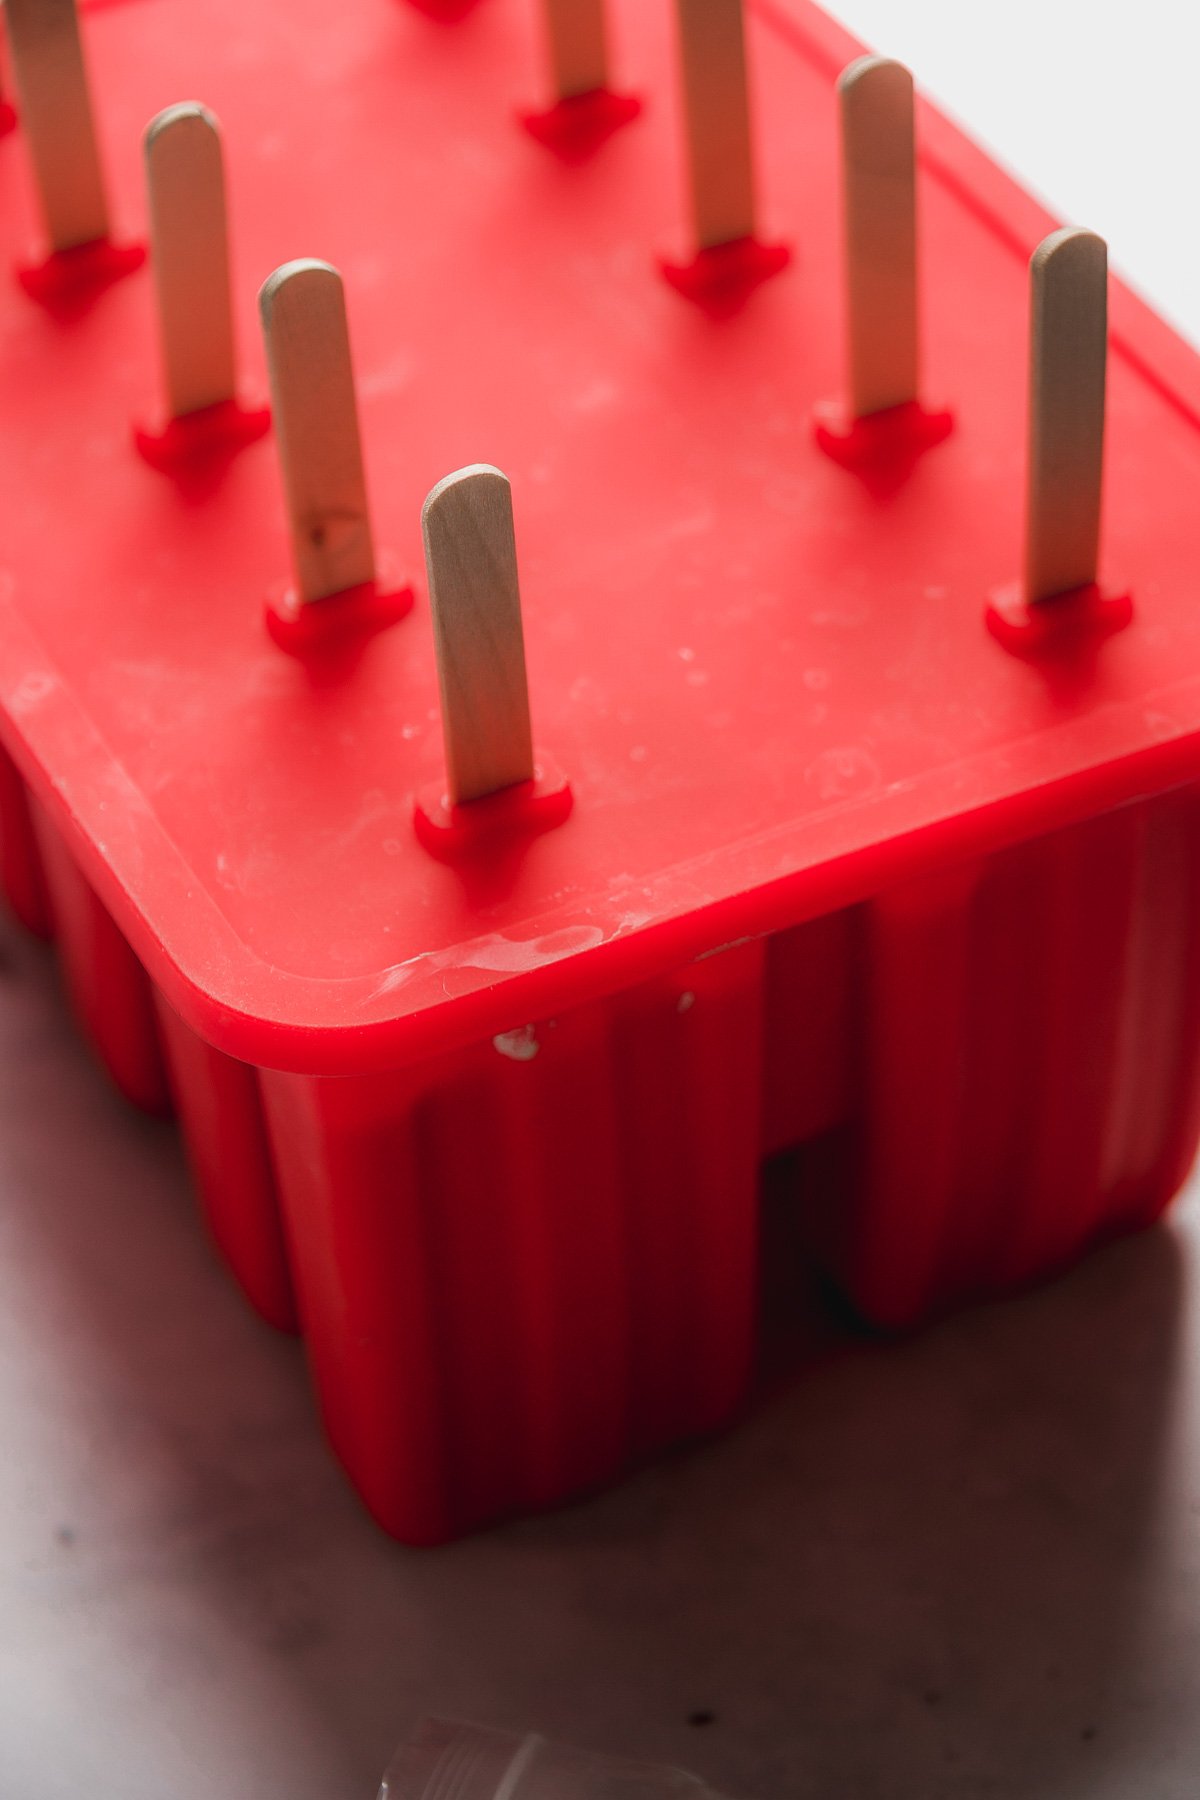 Red popsicle mold with sticks inside.